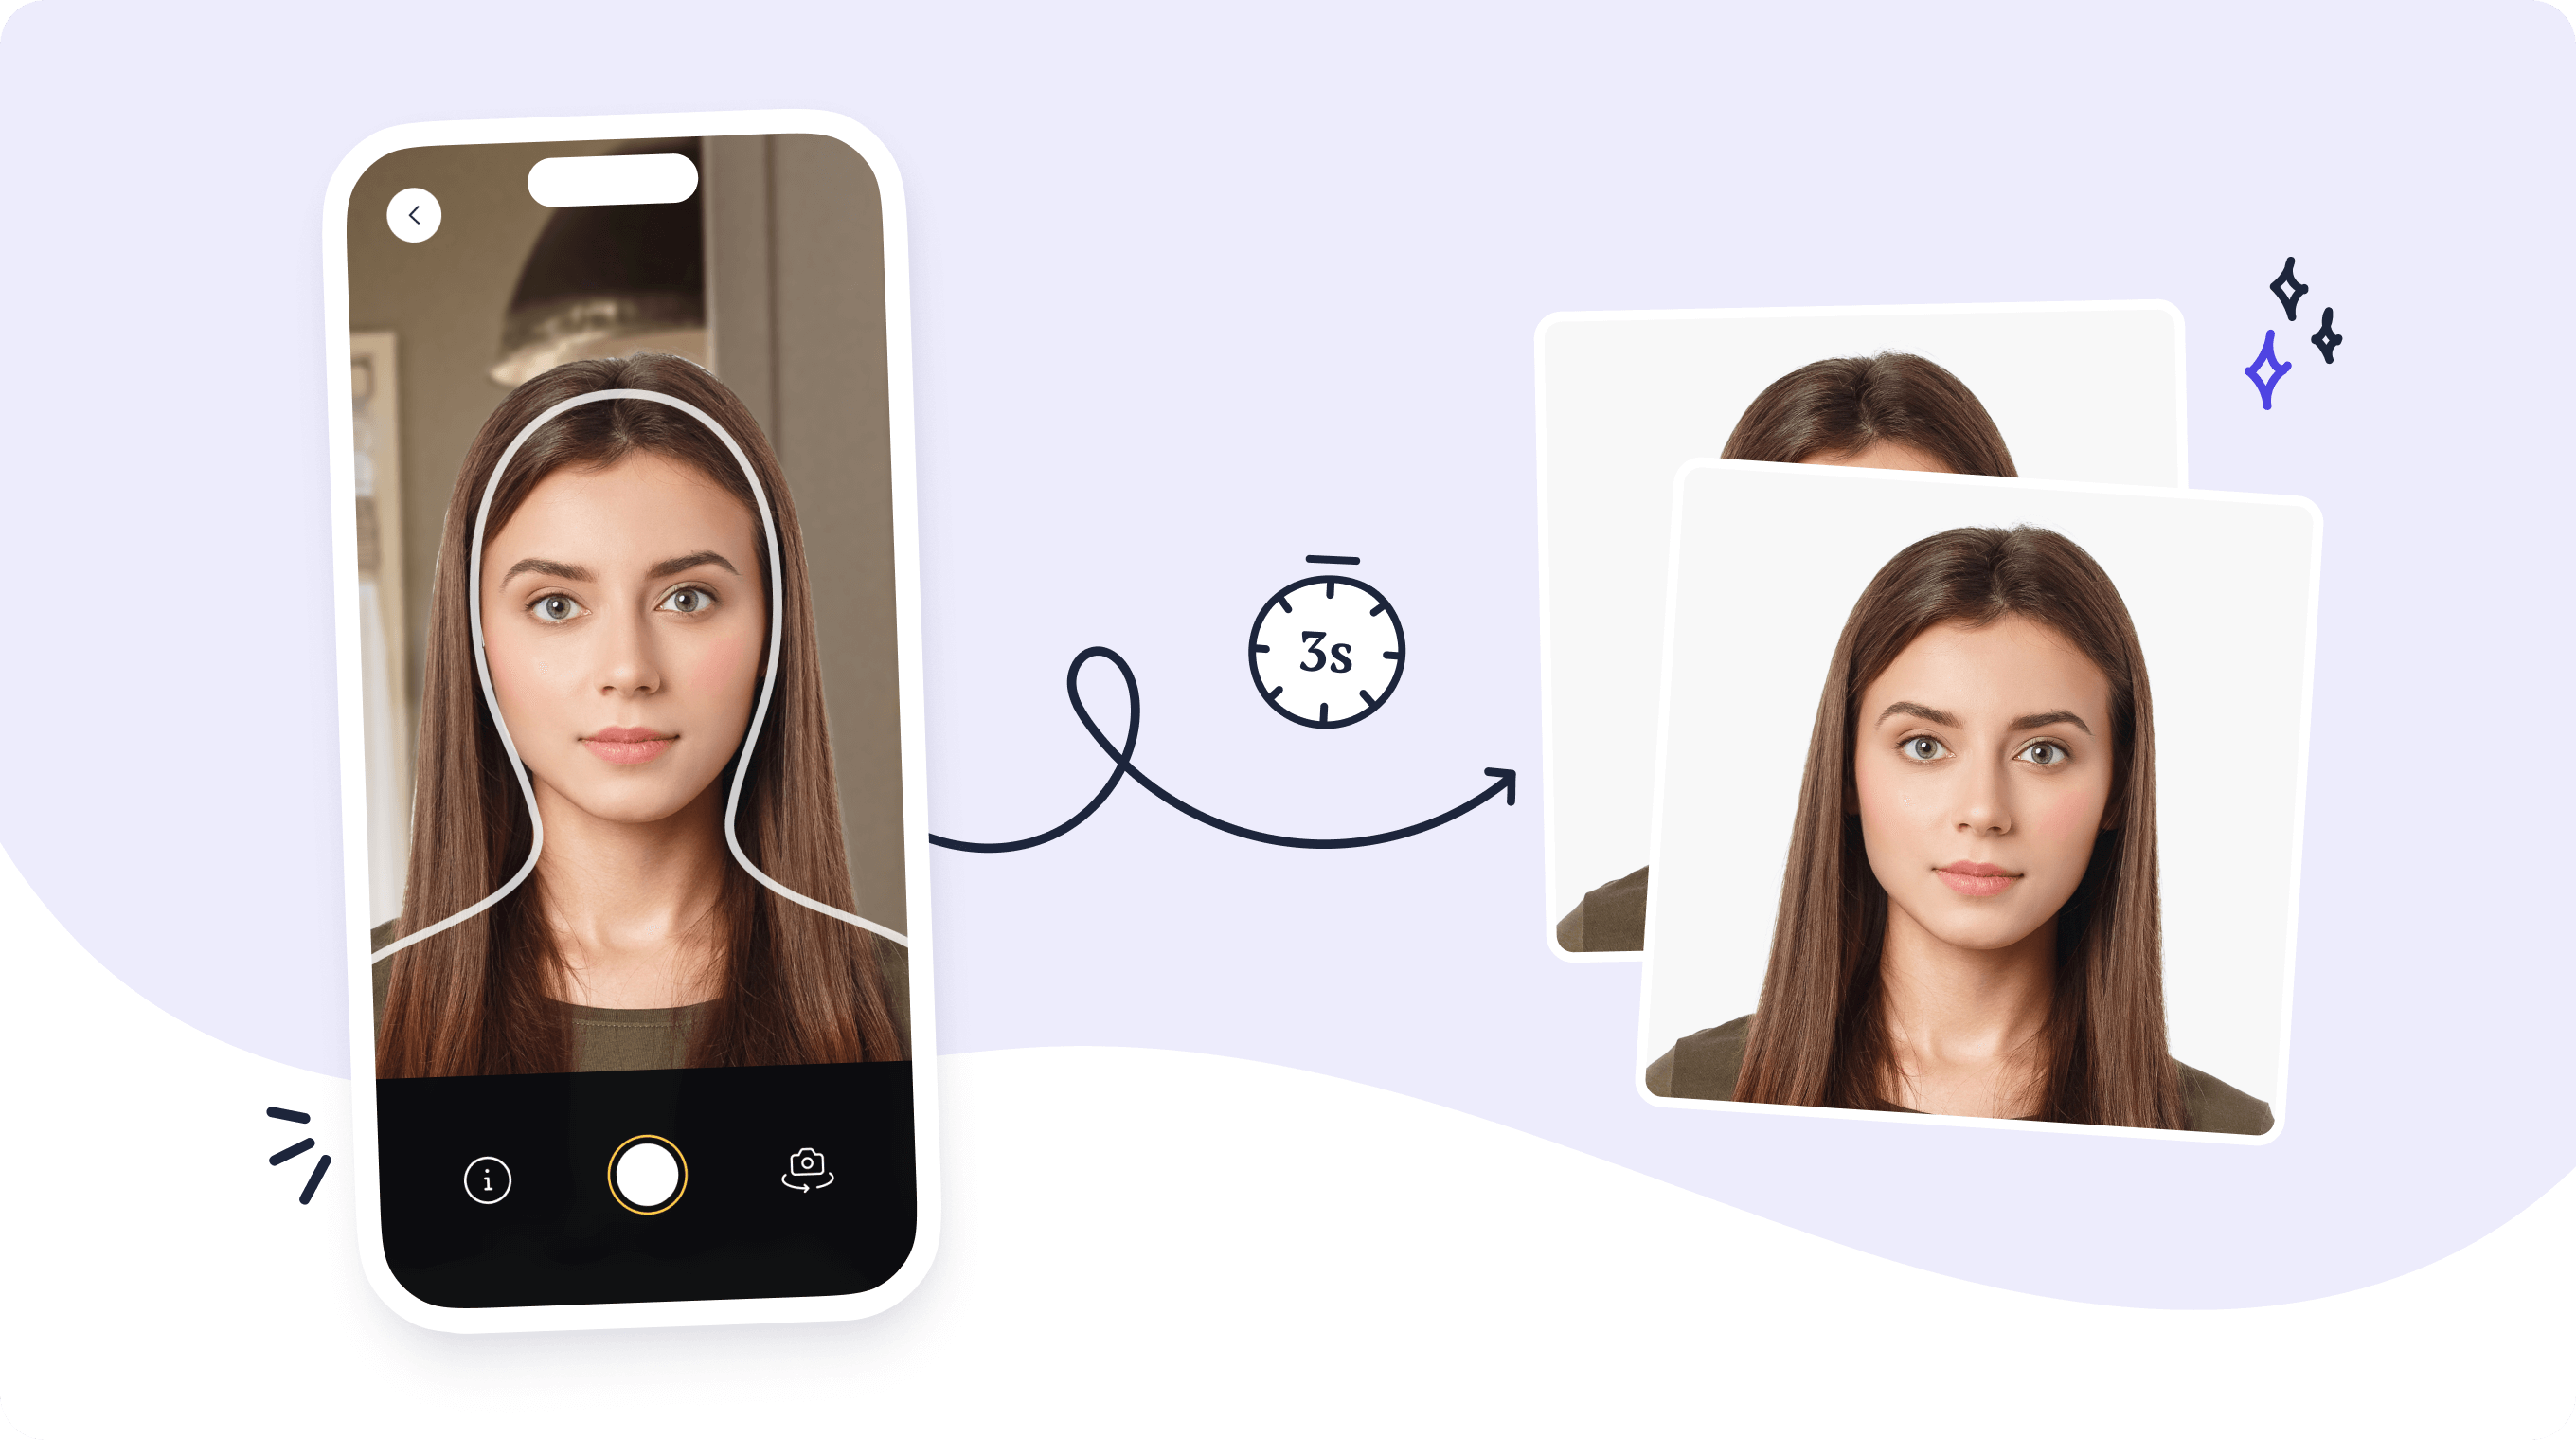 A screenshot showing the before and after of an automatic process of creating US passport photos on a smartphone.